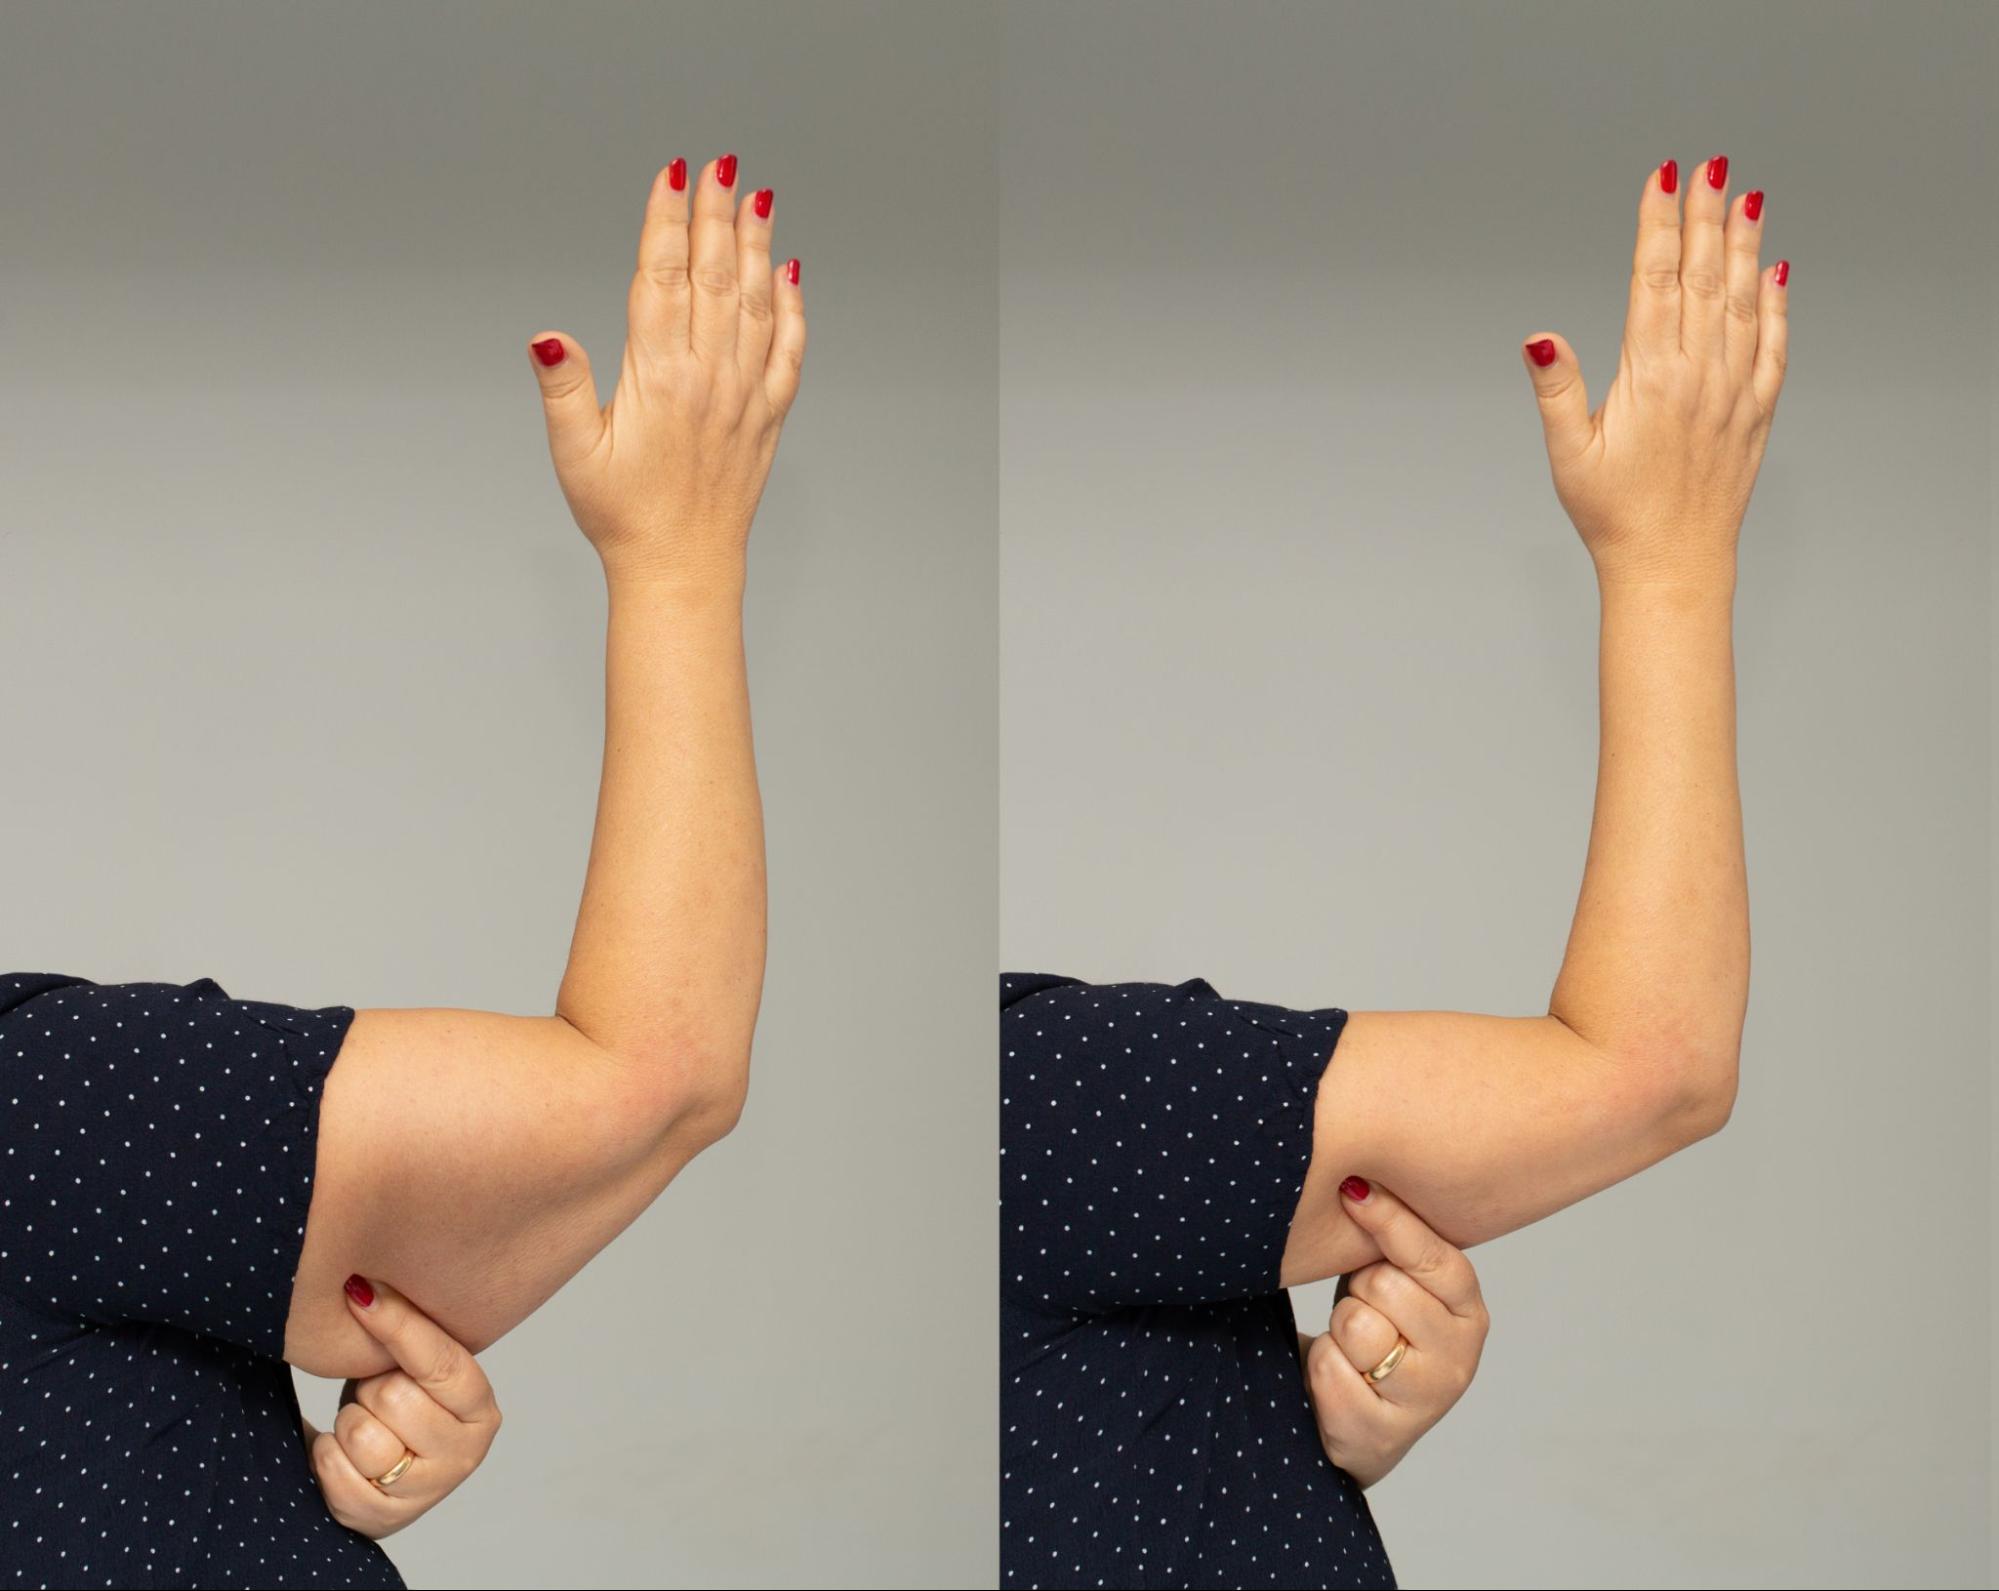 A before and after of sagging skin on the arm to represent plastic surgery after weight loss